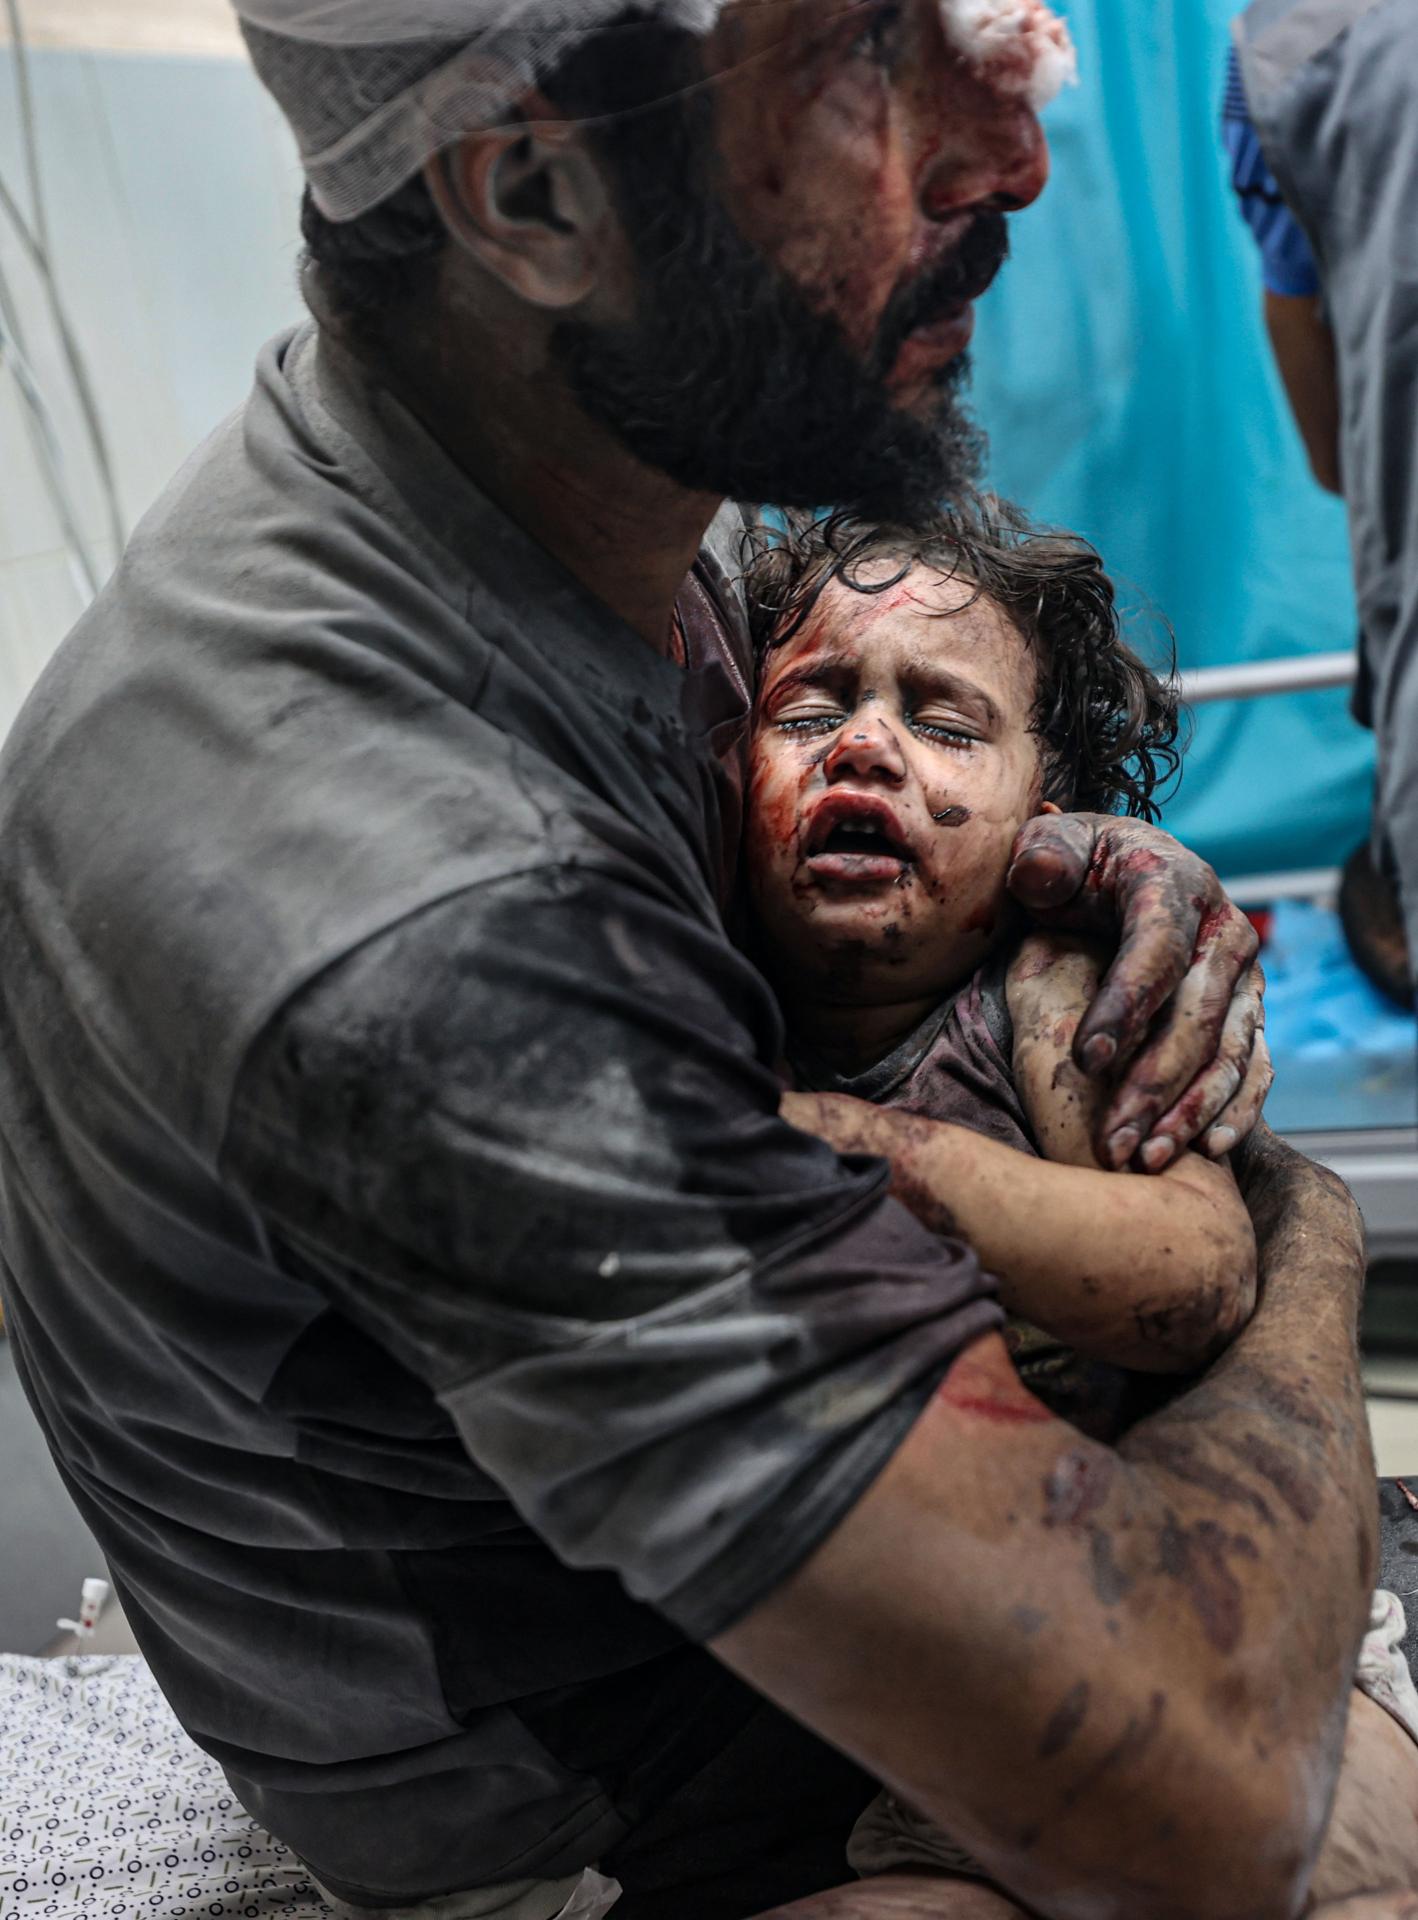 New York Photography Awards Winner - The Israeli-Palestinian conflict